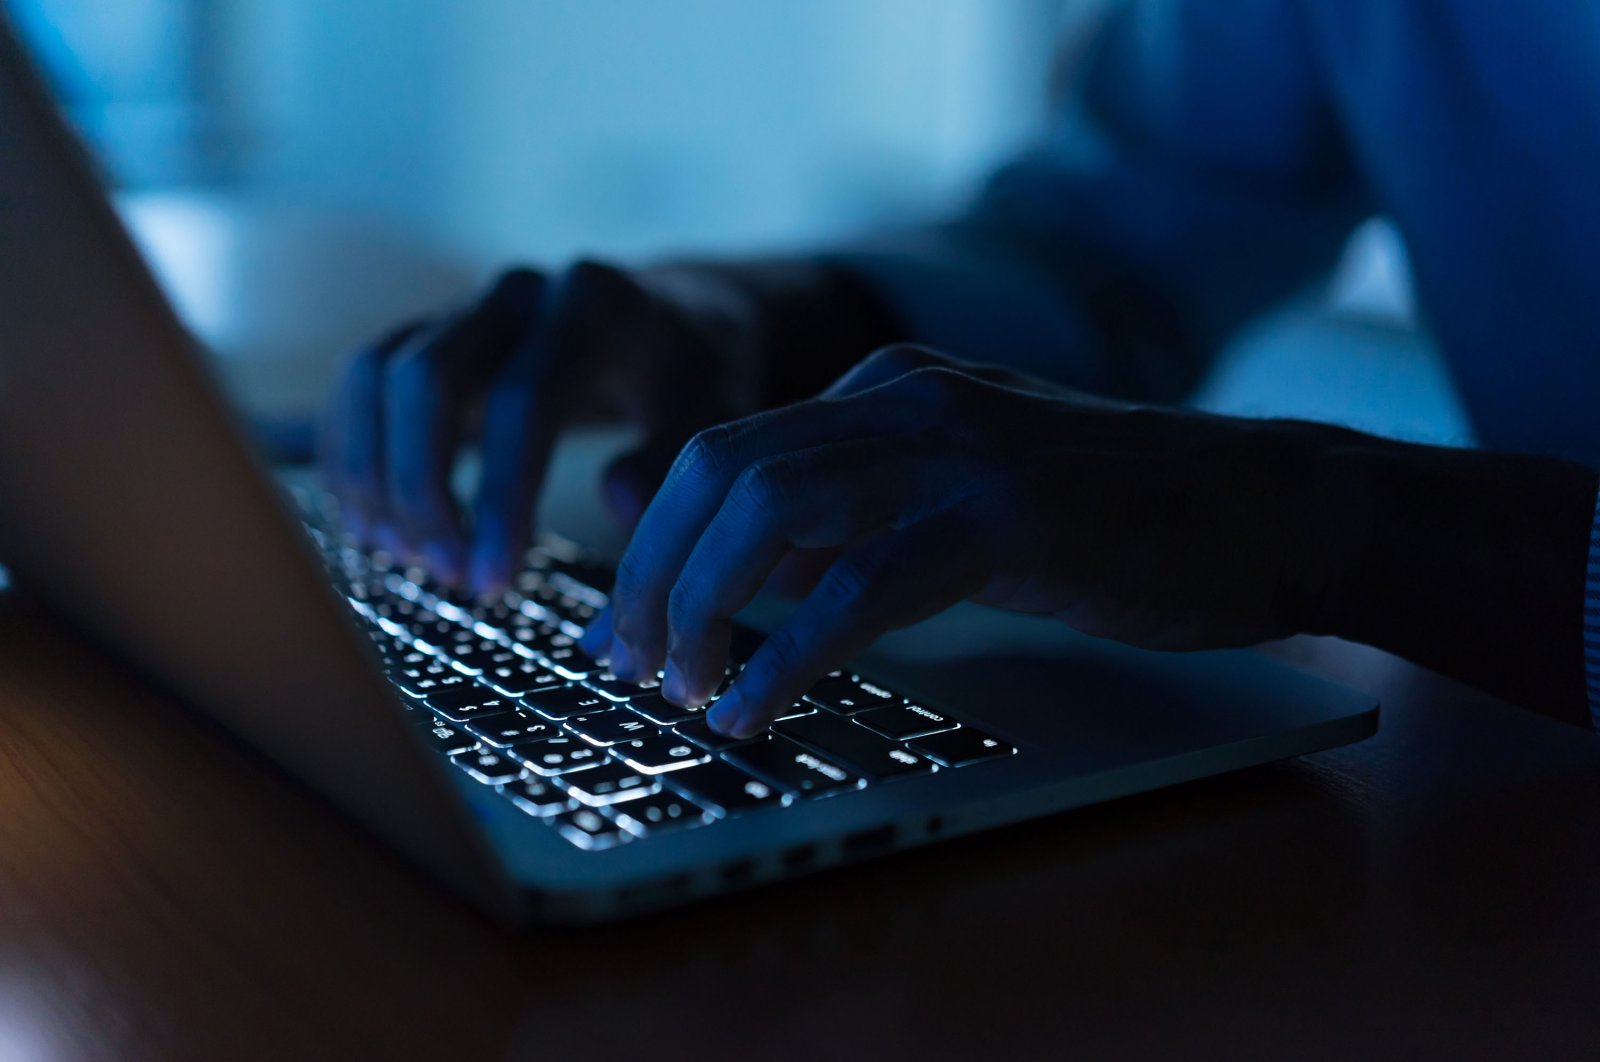 Man types on a laptop in the darkness in this undated file photo. (Shutterstock File Photo)